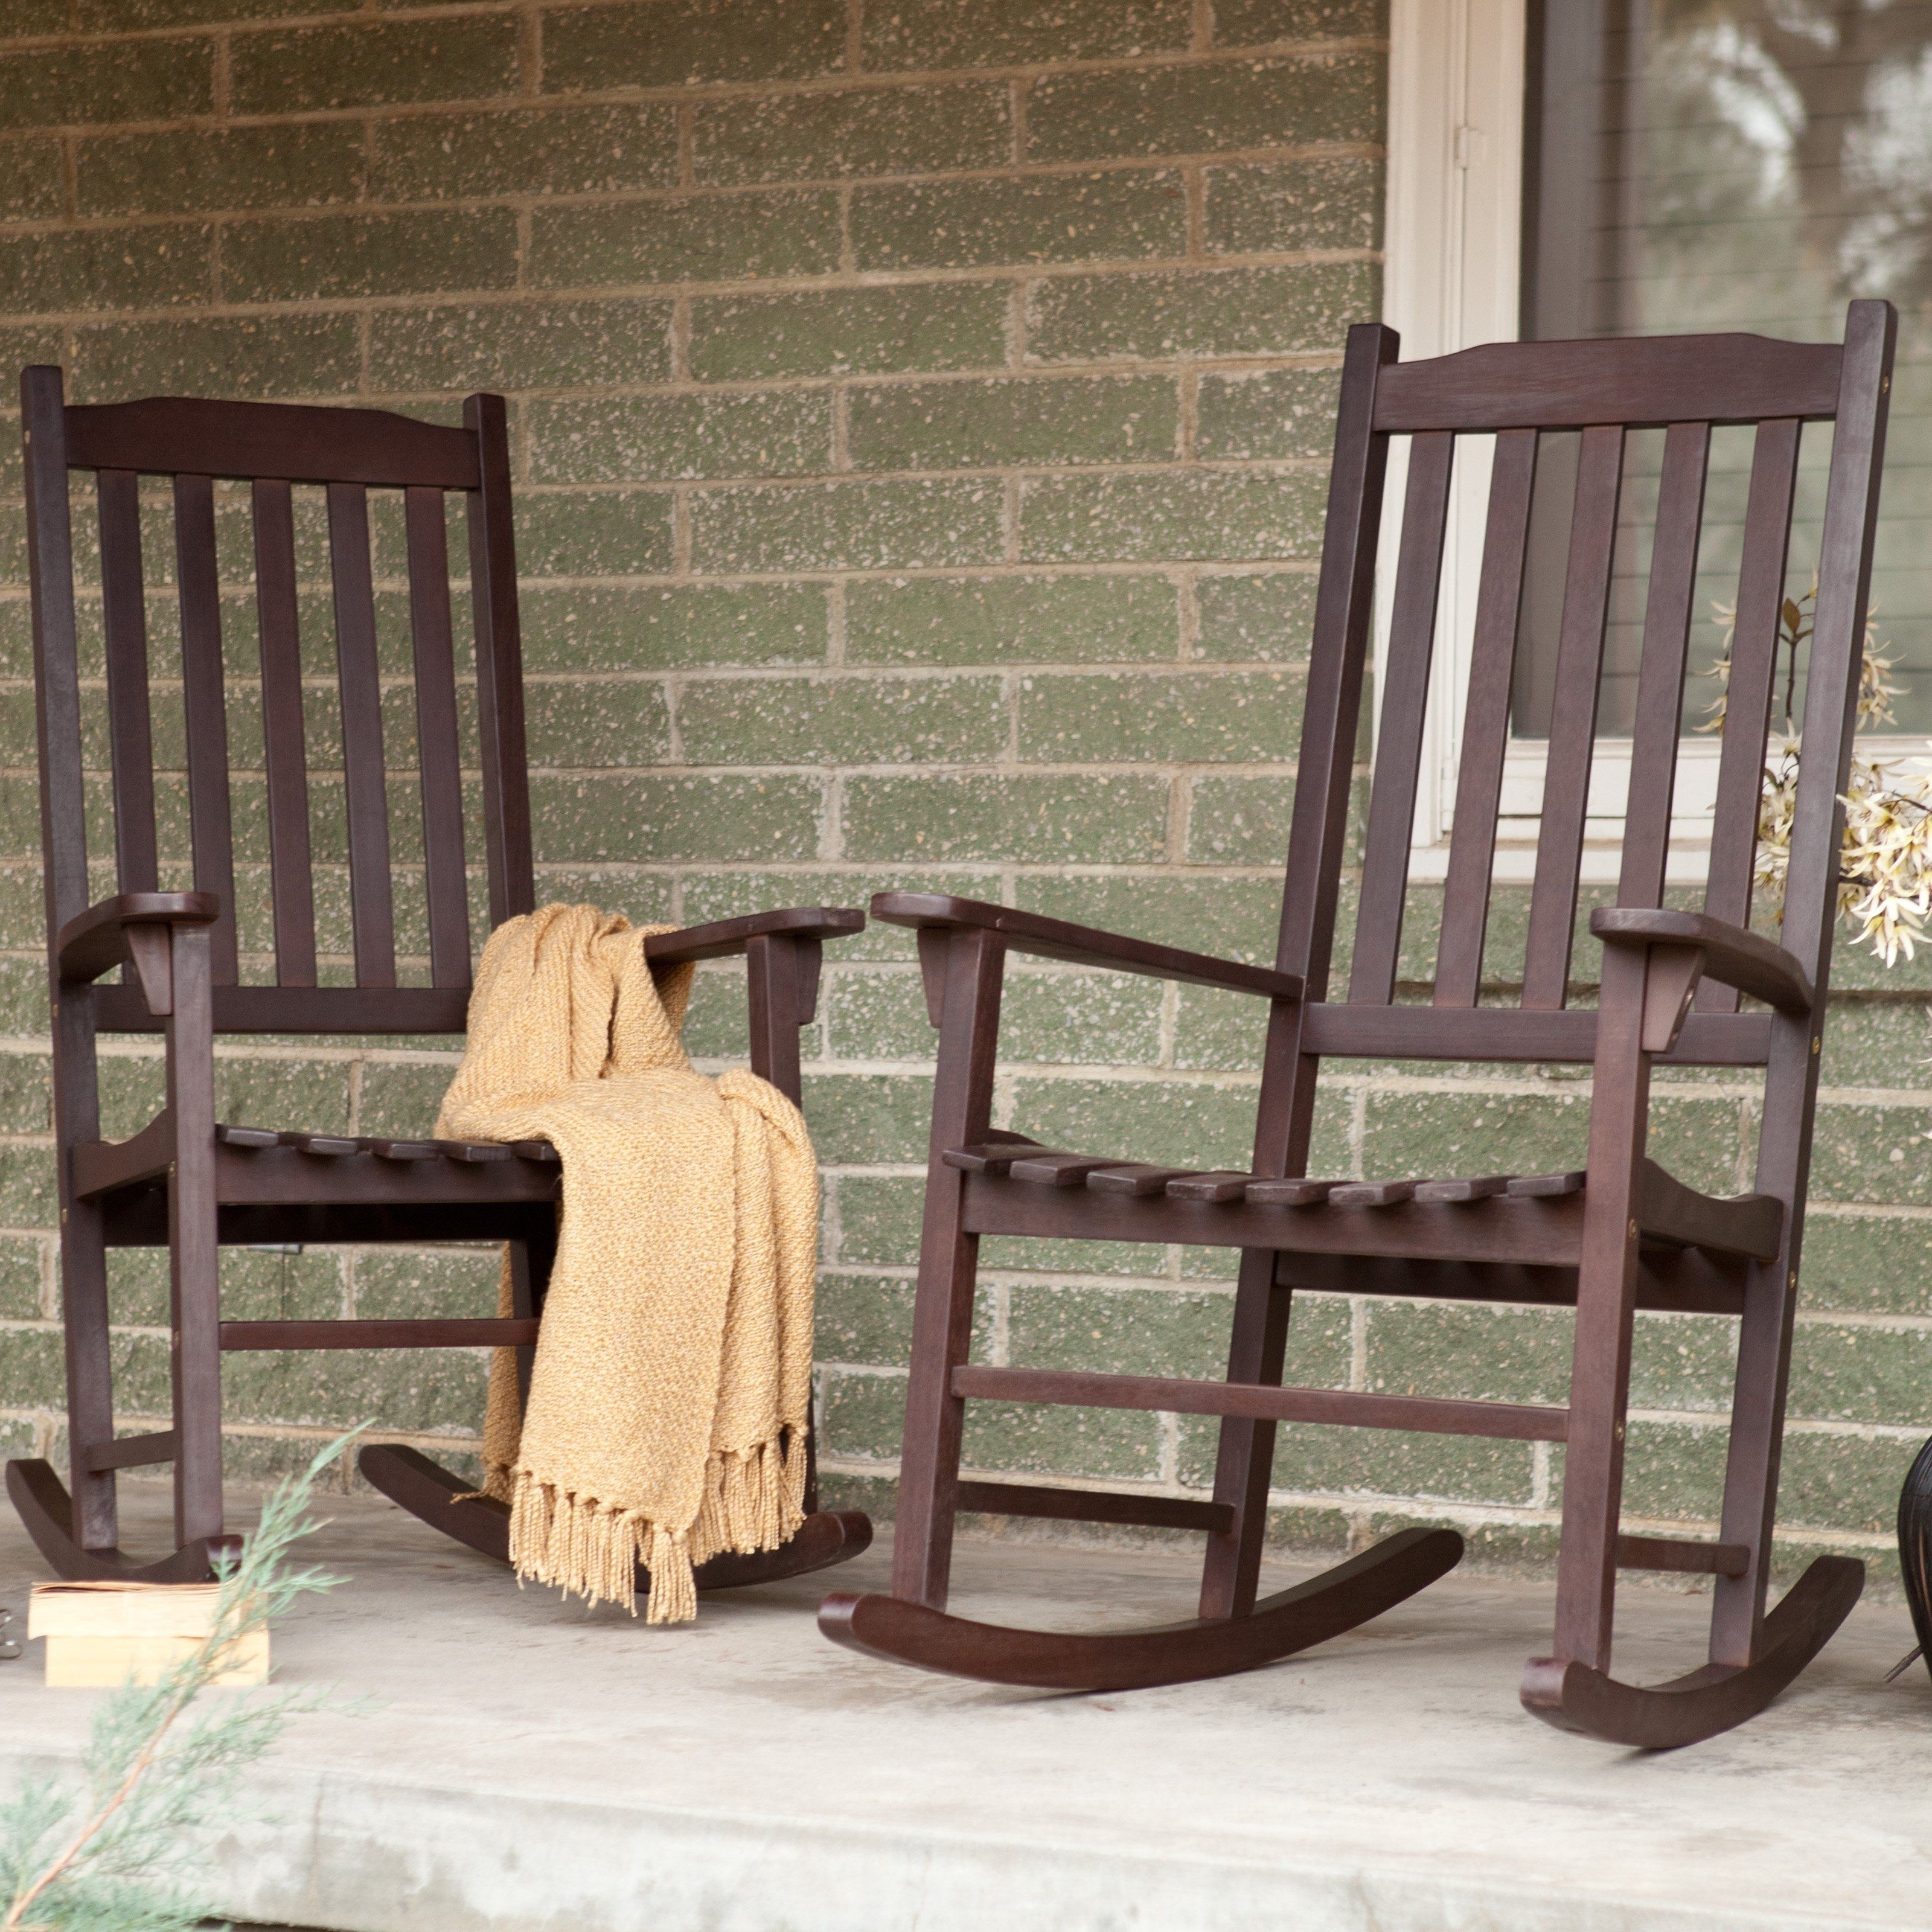 How To Choose Comfortable Outdoor Rocking Chairs – Yonohomedesign Pertaining To Outdoor Rocking Chairs (View 10 of 15)